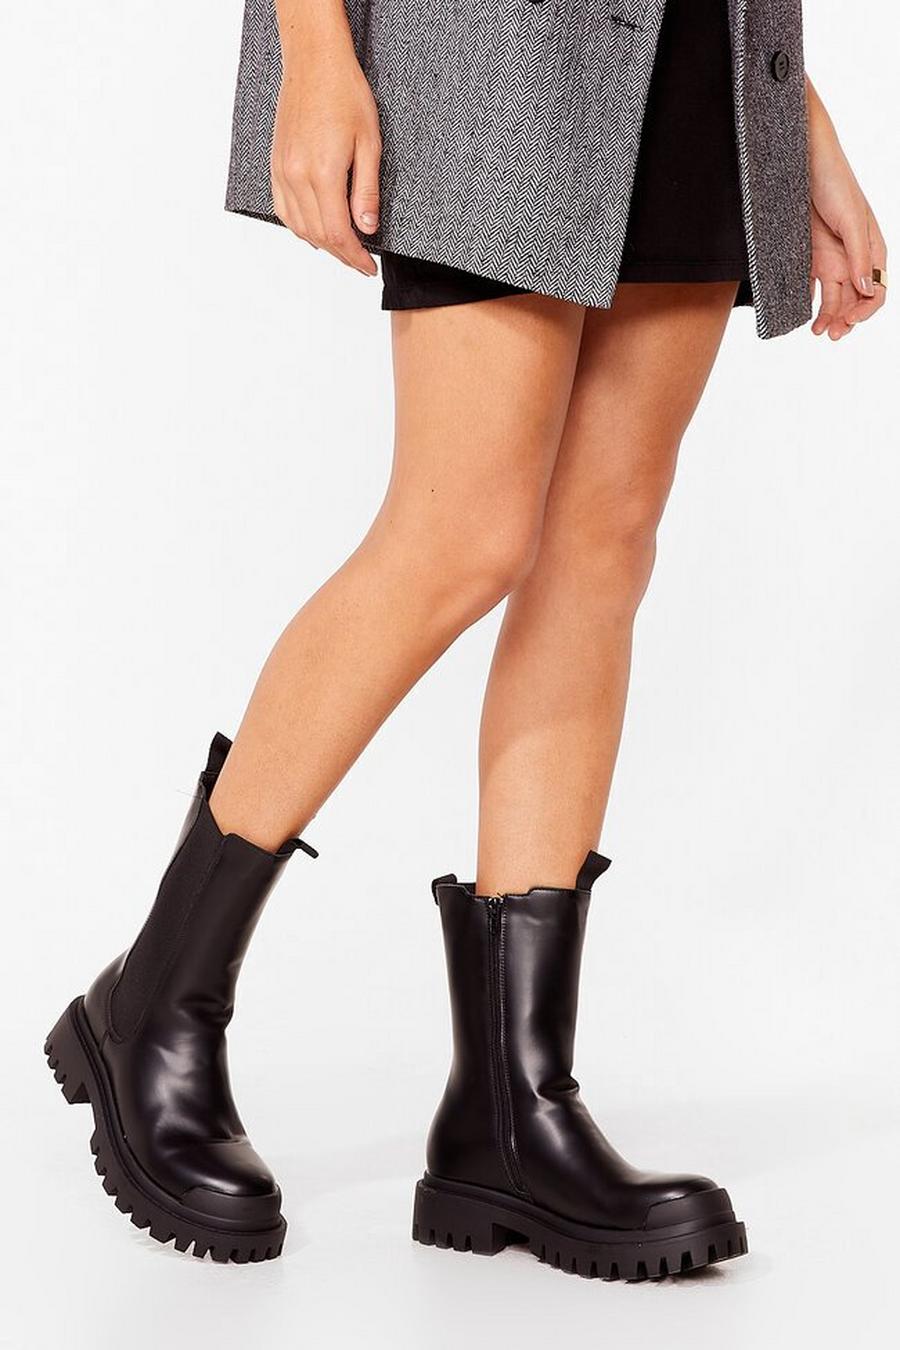 Calf High Cleated Faux Leather Boots